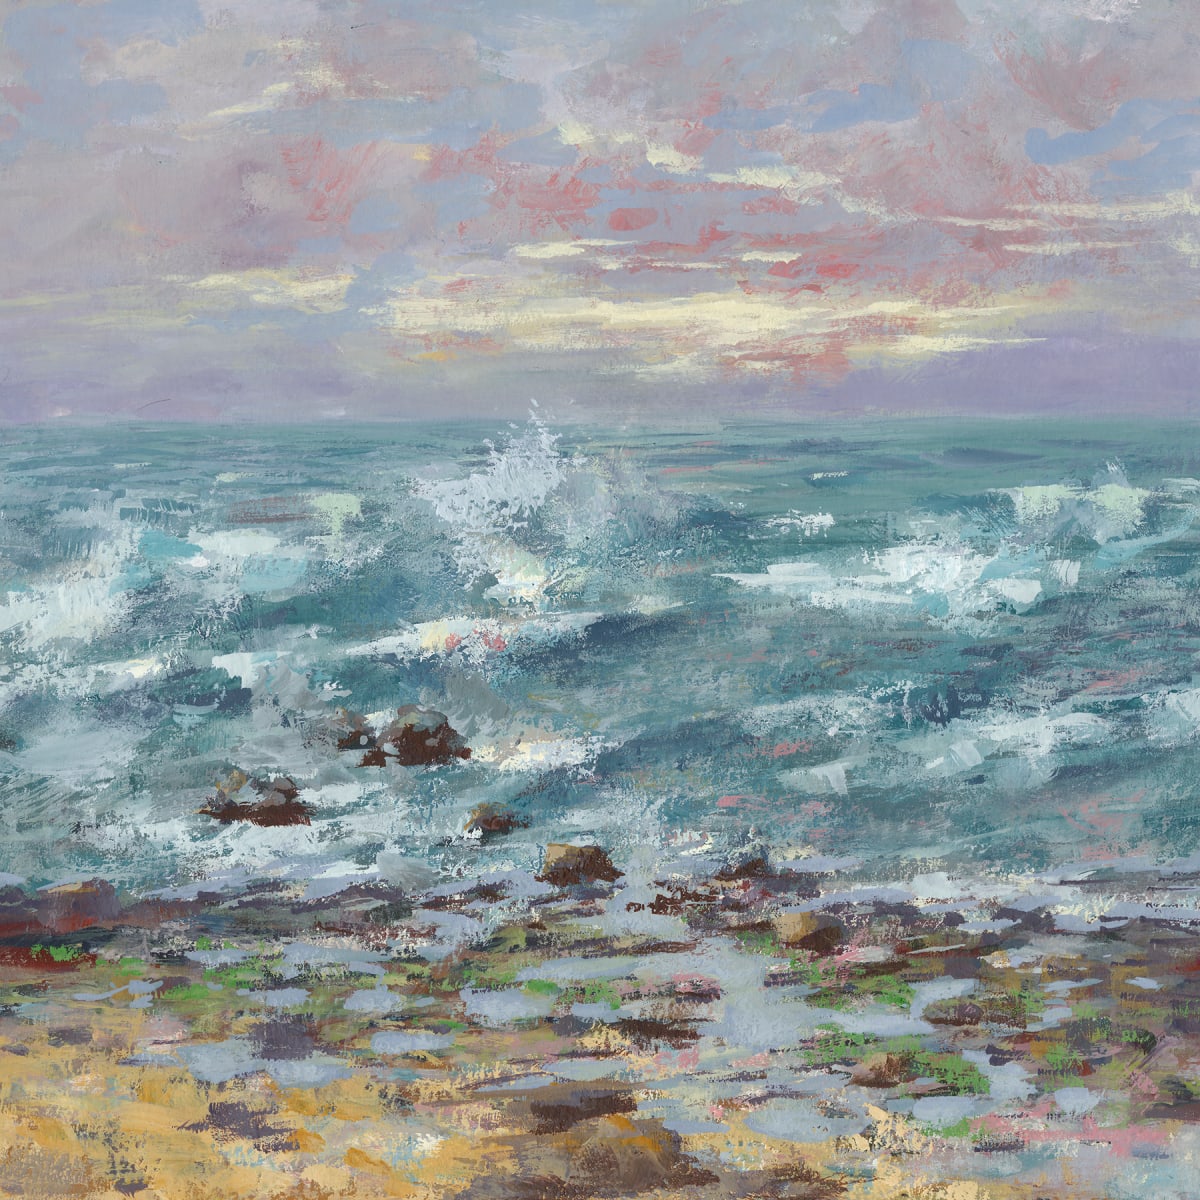 Waves of Gratitude by Jessica Falcone  Image: Plein Air painting of the North Shore waves of Kauai